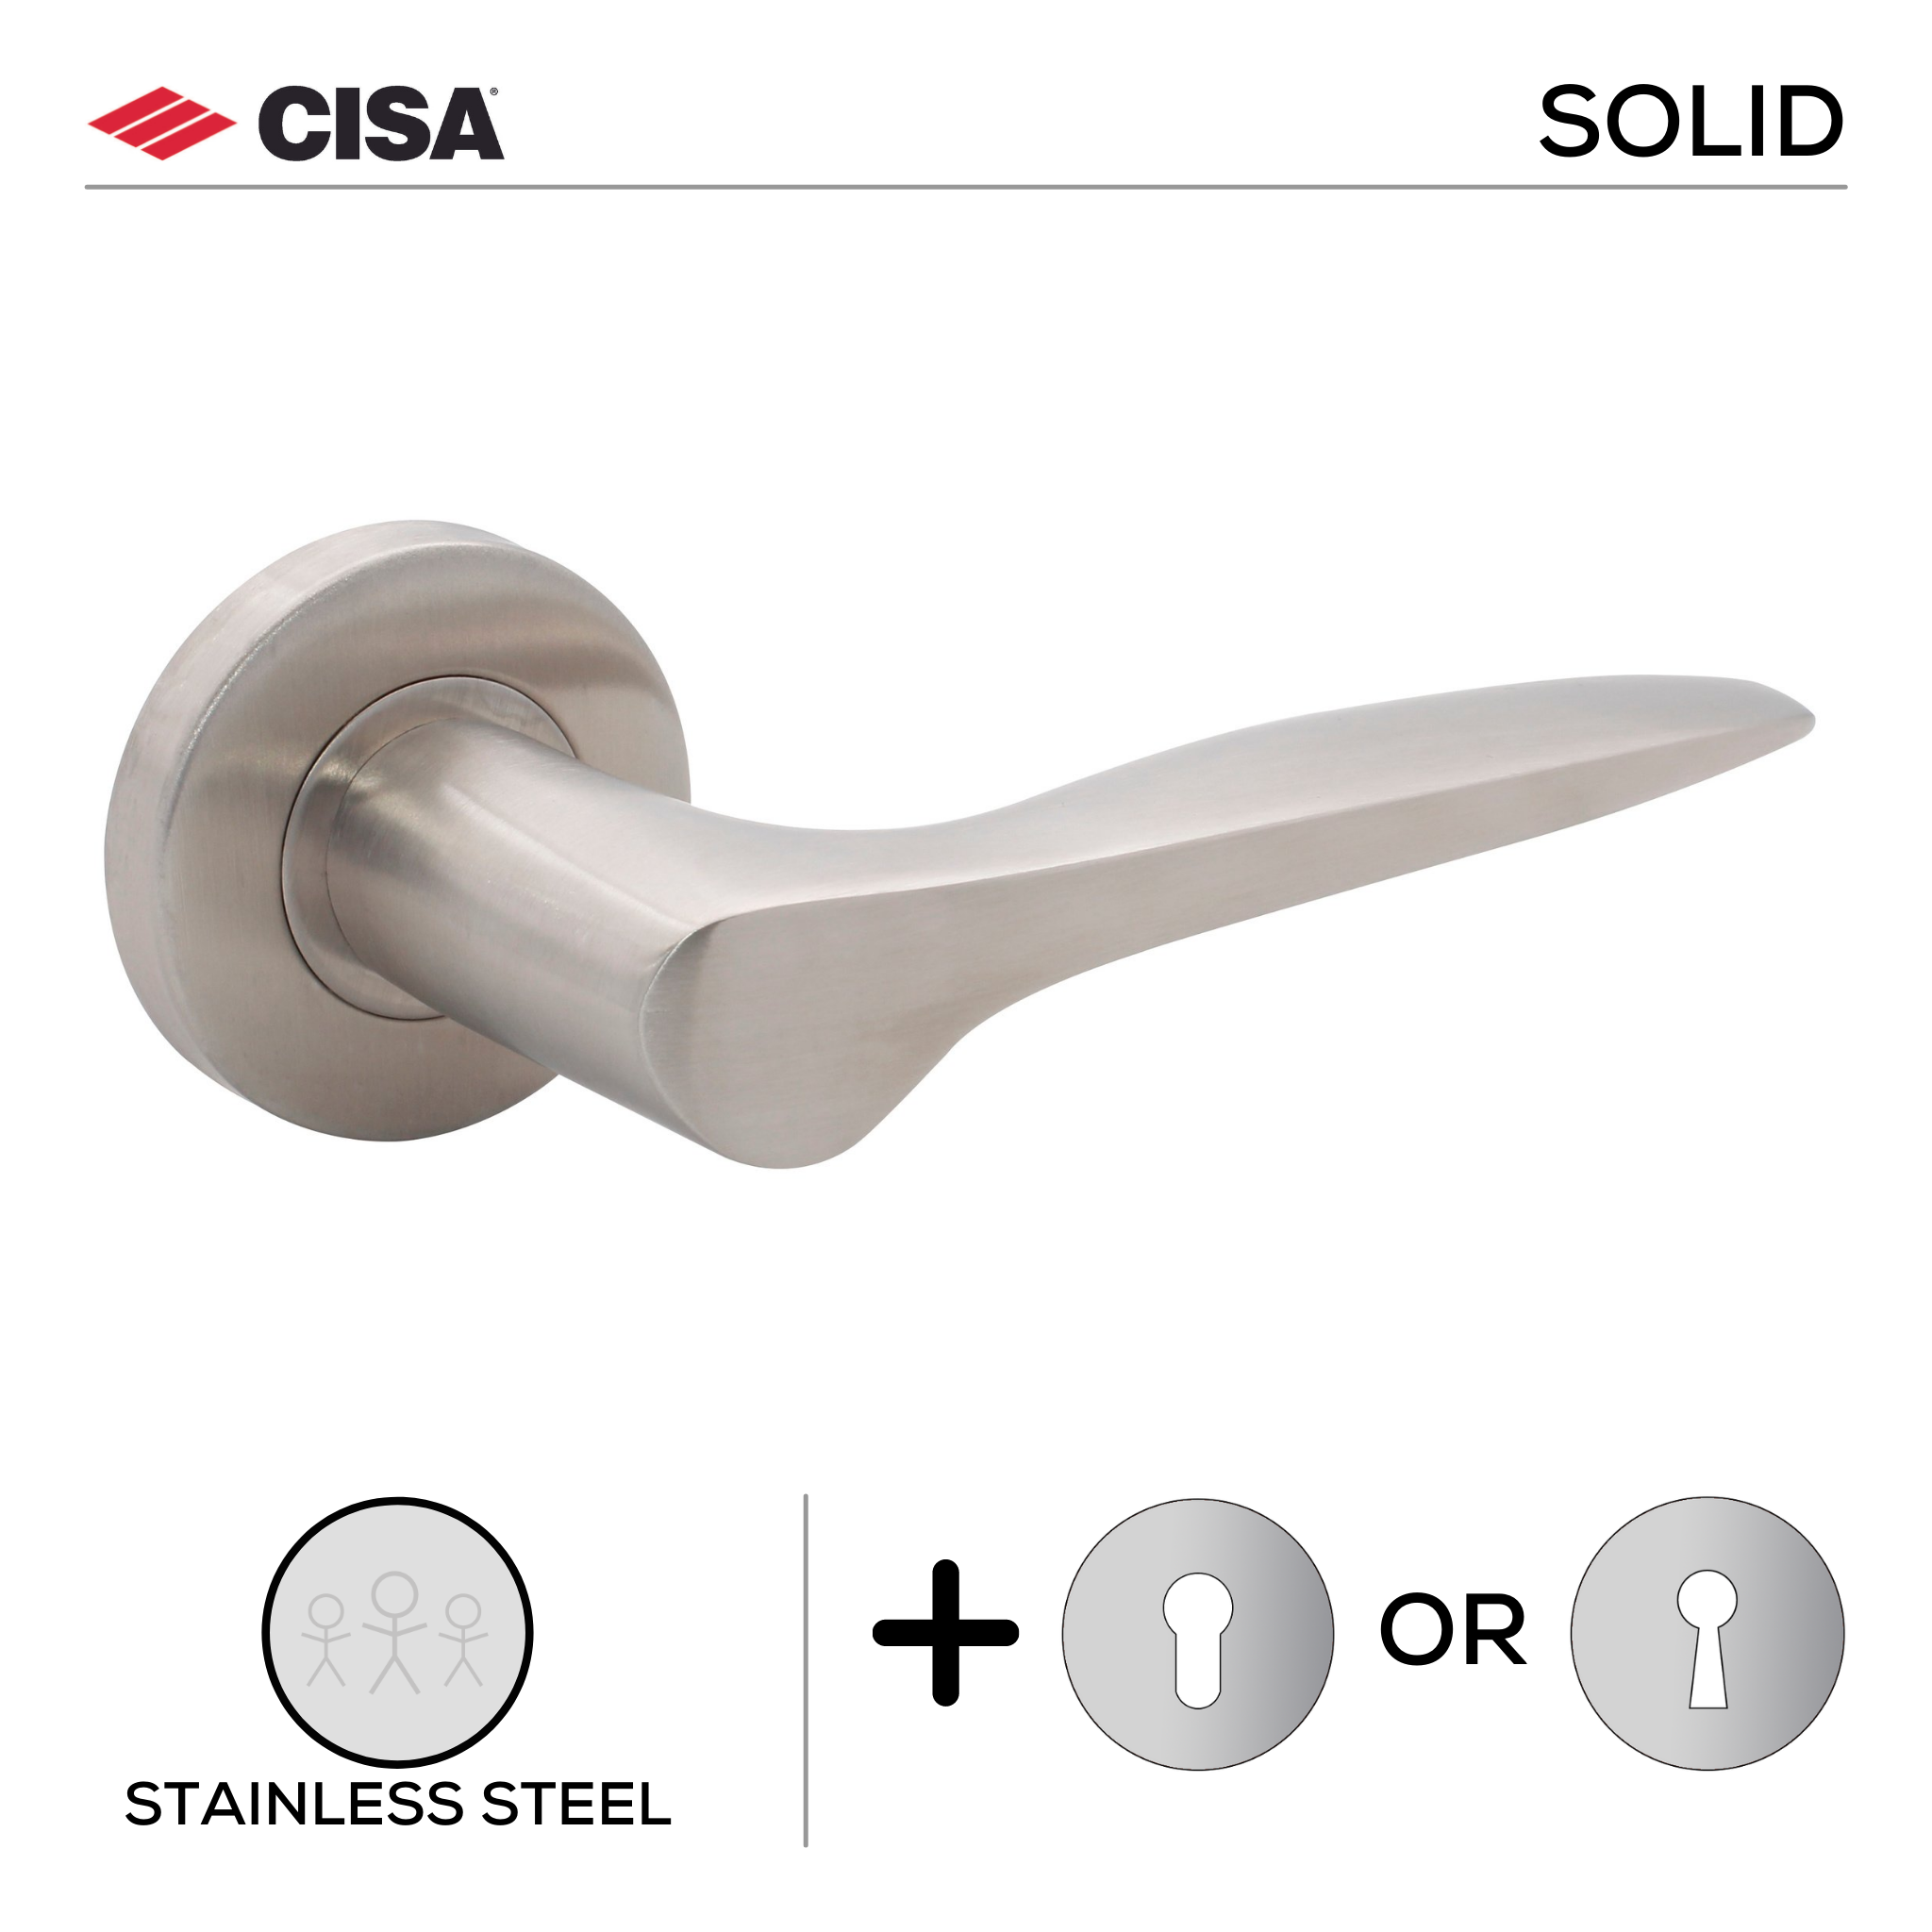 FS109.R._.SS, Lever Handles, Solid, On Round Rose, With Escutcheons, Stainless Steel, CISA